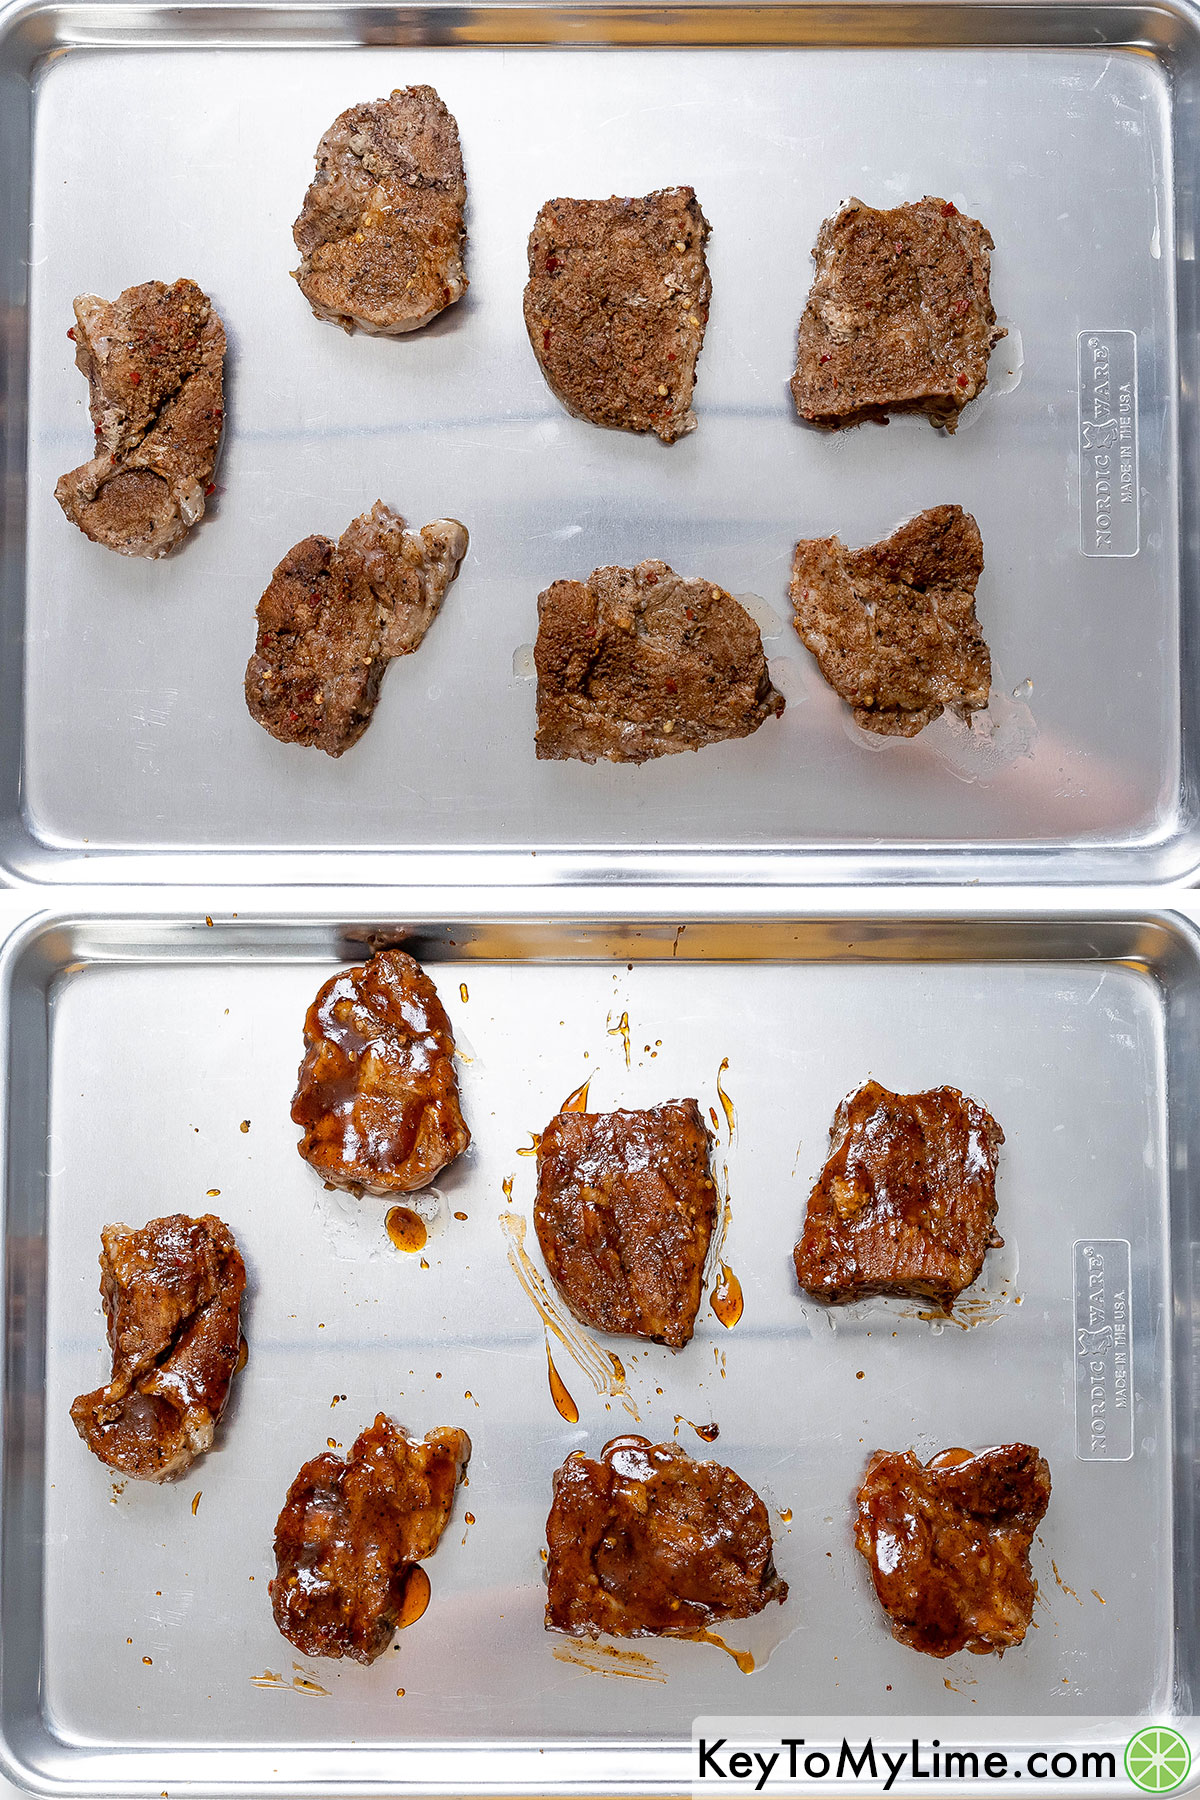 Placing the cooked country style ribs on a baking sheet and brushing them with BBQ sauce before broiling.